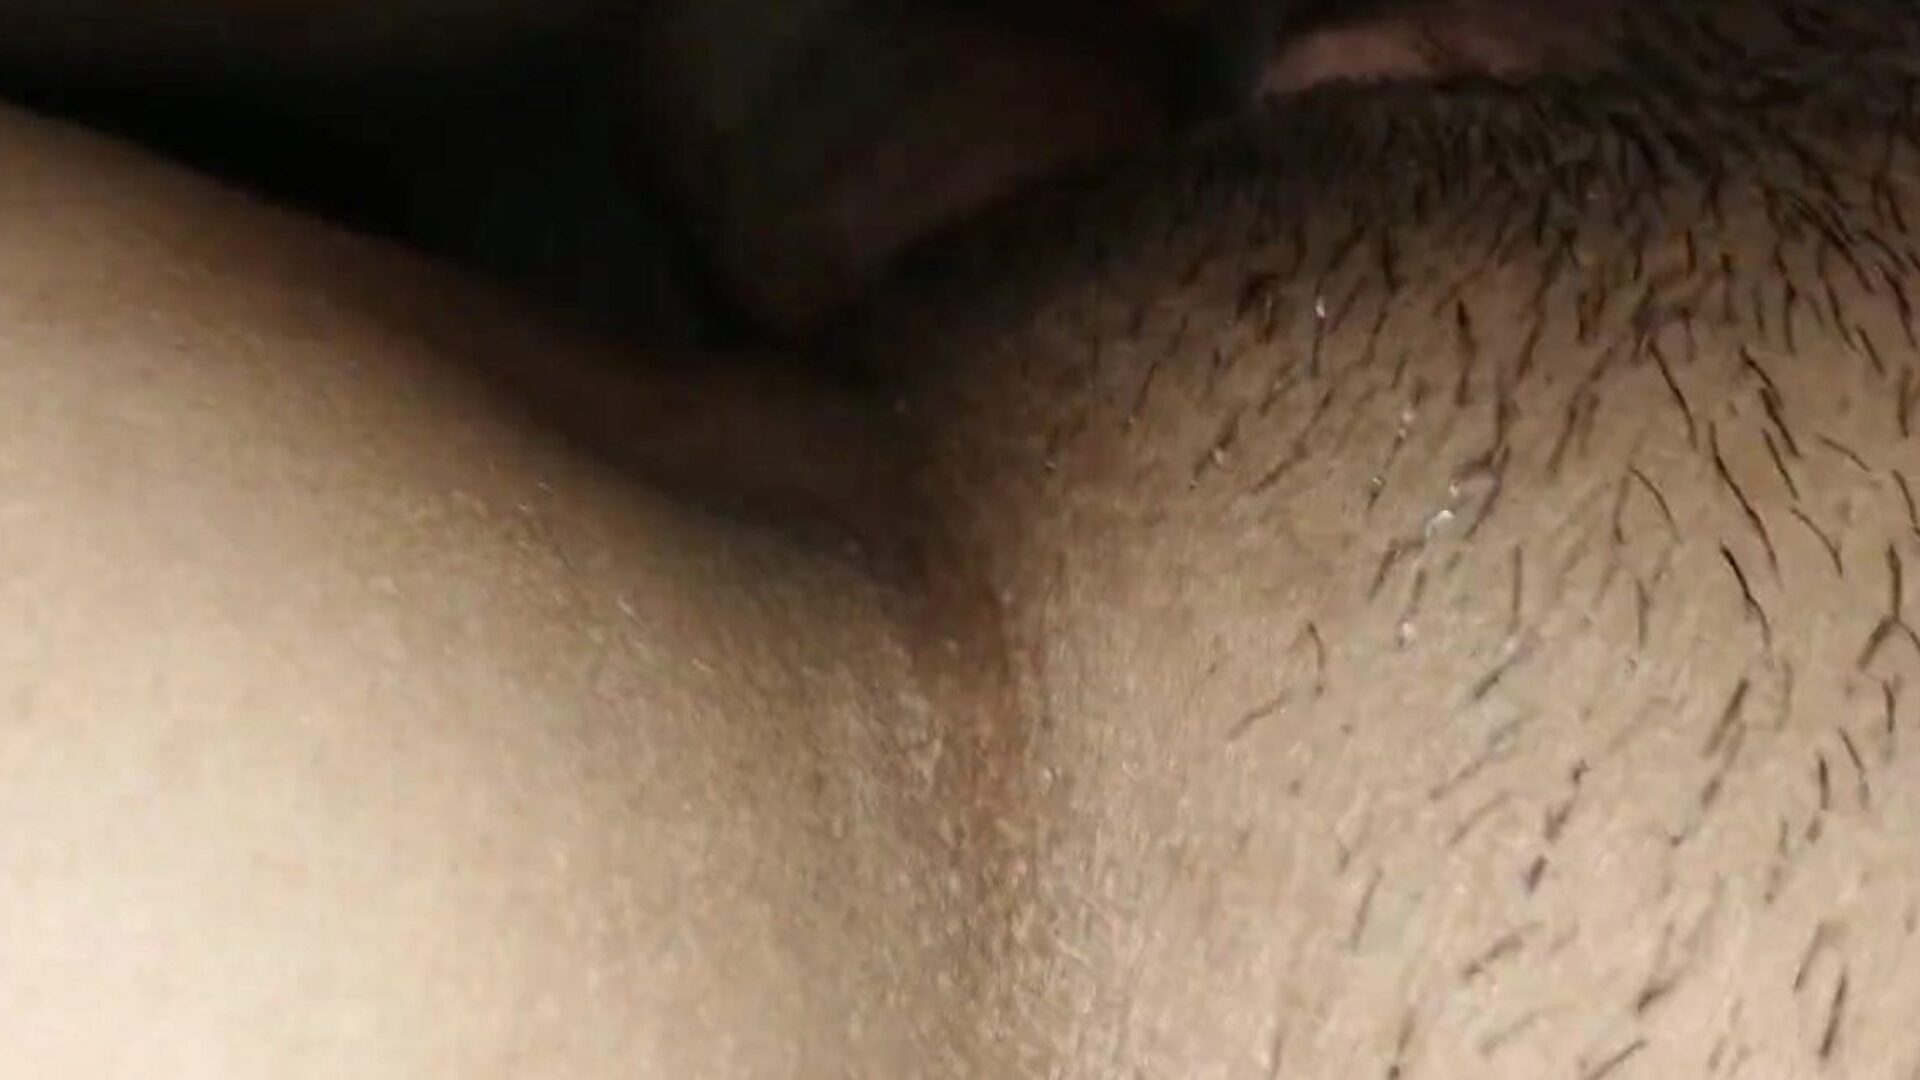 close up my wife pussy, free gf pussy hd porno 41: xhamster watch close up my wife pussy episode on xhamster, the best hd fuckfest tube site with lots of free malaysian asian & gf pussy porn vids